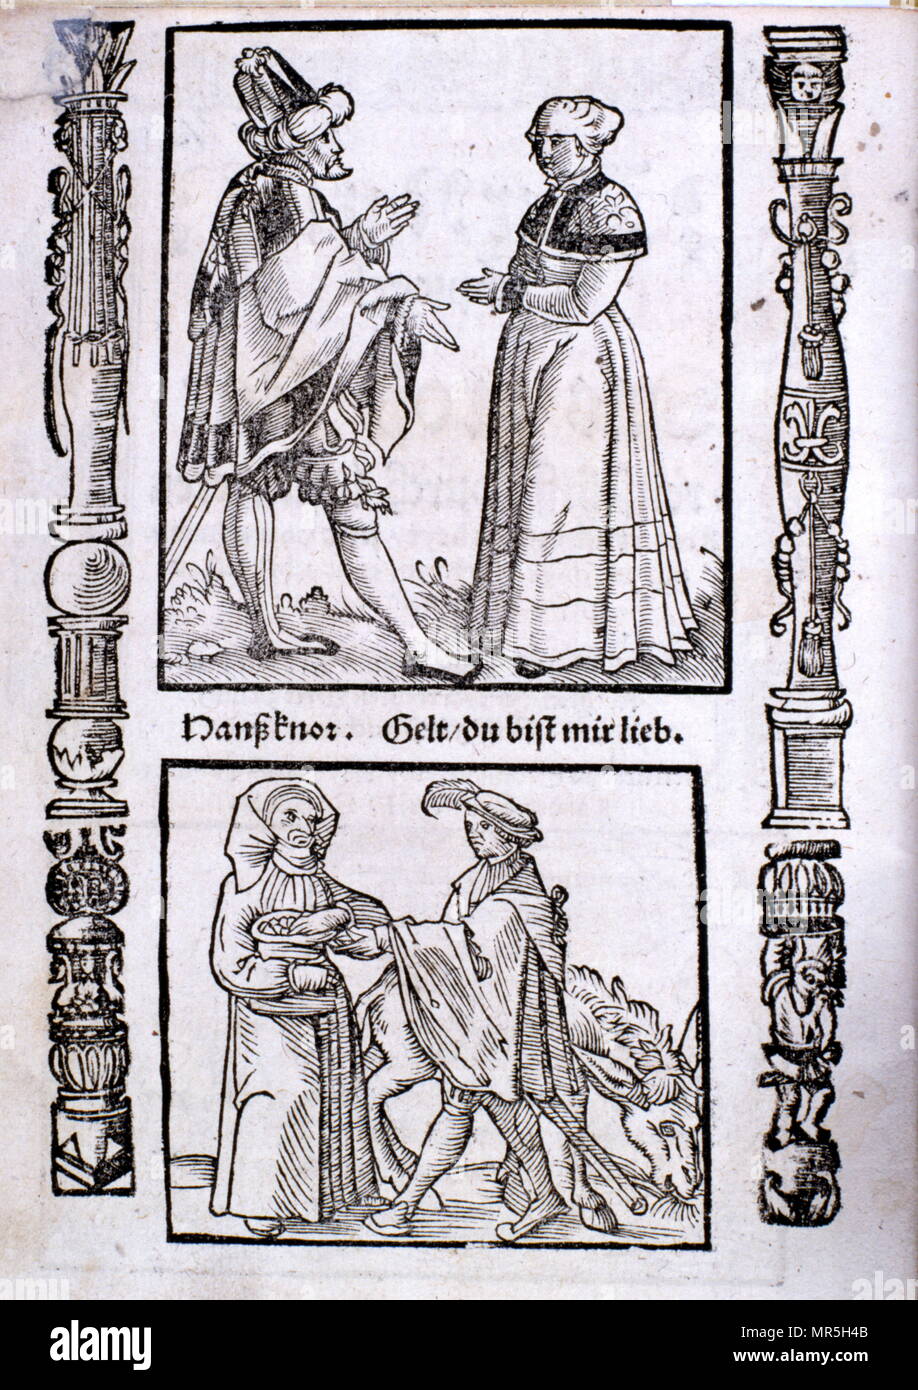 Woodcut illustration from a 15th century edition of 'Das Narrenschiff' (The Ship of Fools), by Sebastian Brant (Brandt) (1457 – 10 May 1521), a German humanist and satirist. Stock Photo